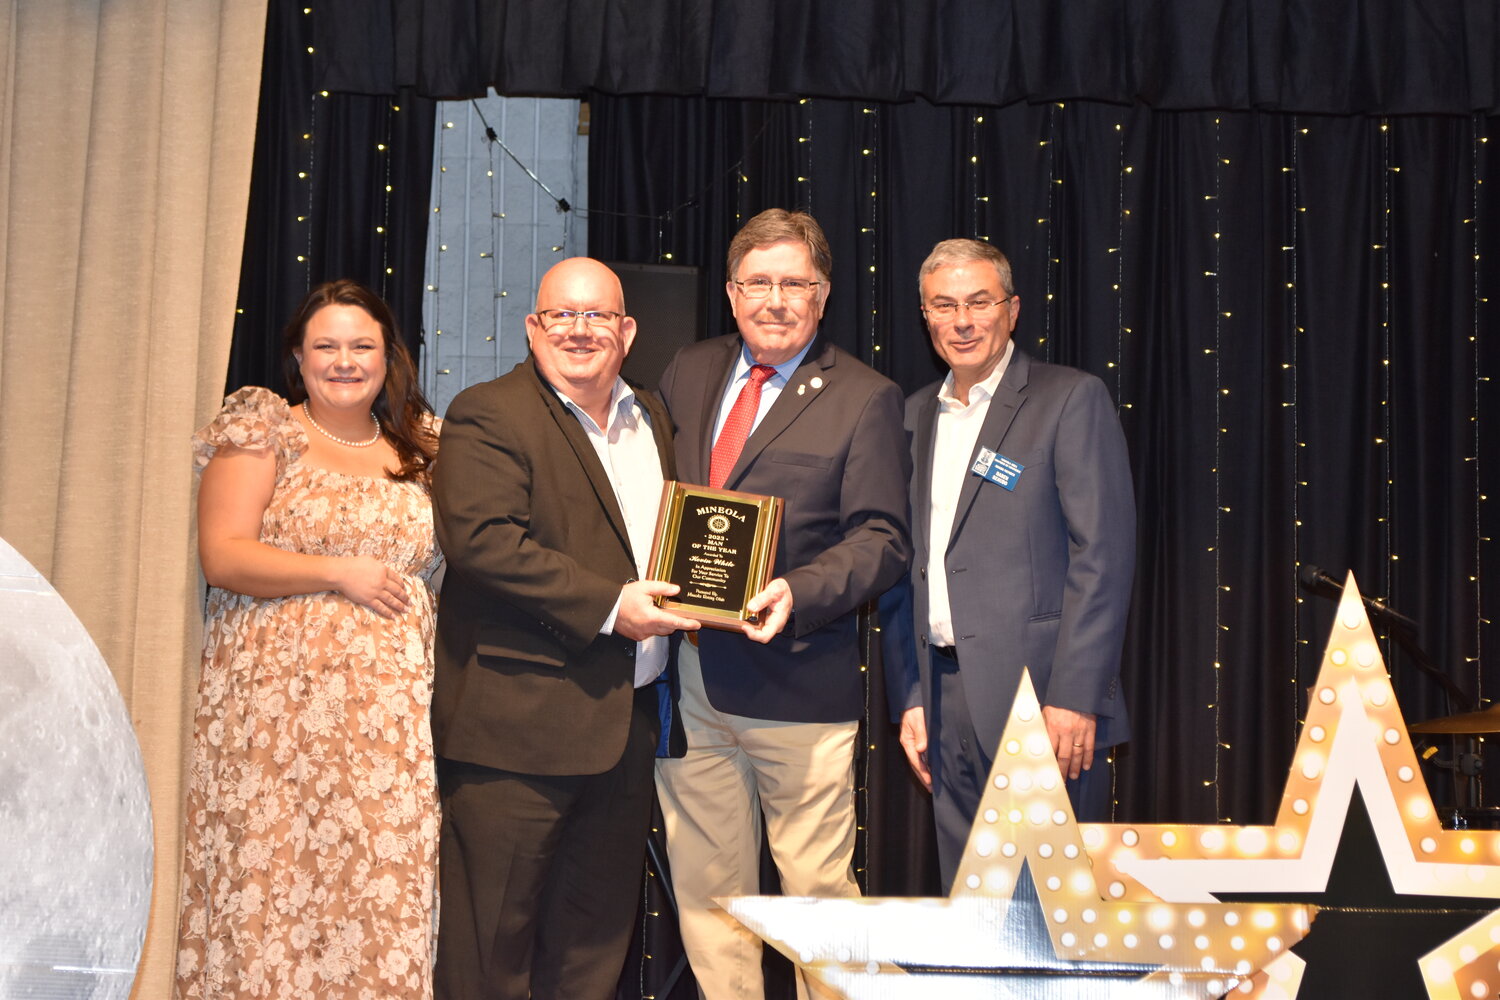 Mineola Man of the Year Kevin White, second from left, is congratulated by presenter Roy Shockey, Chamber President Kelsie McGilvray and Vice President Daren Beaudo.